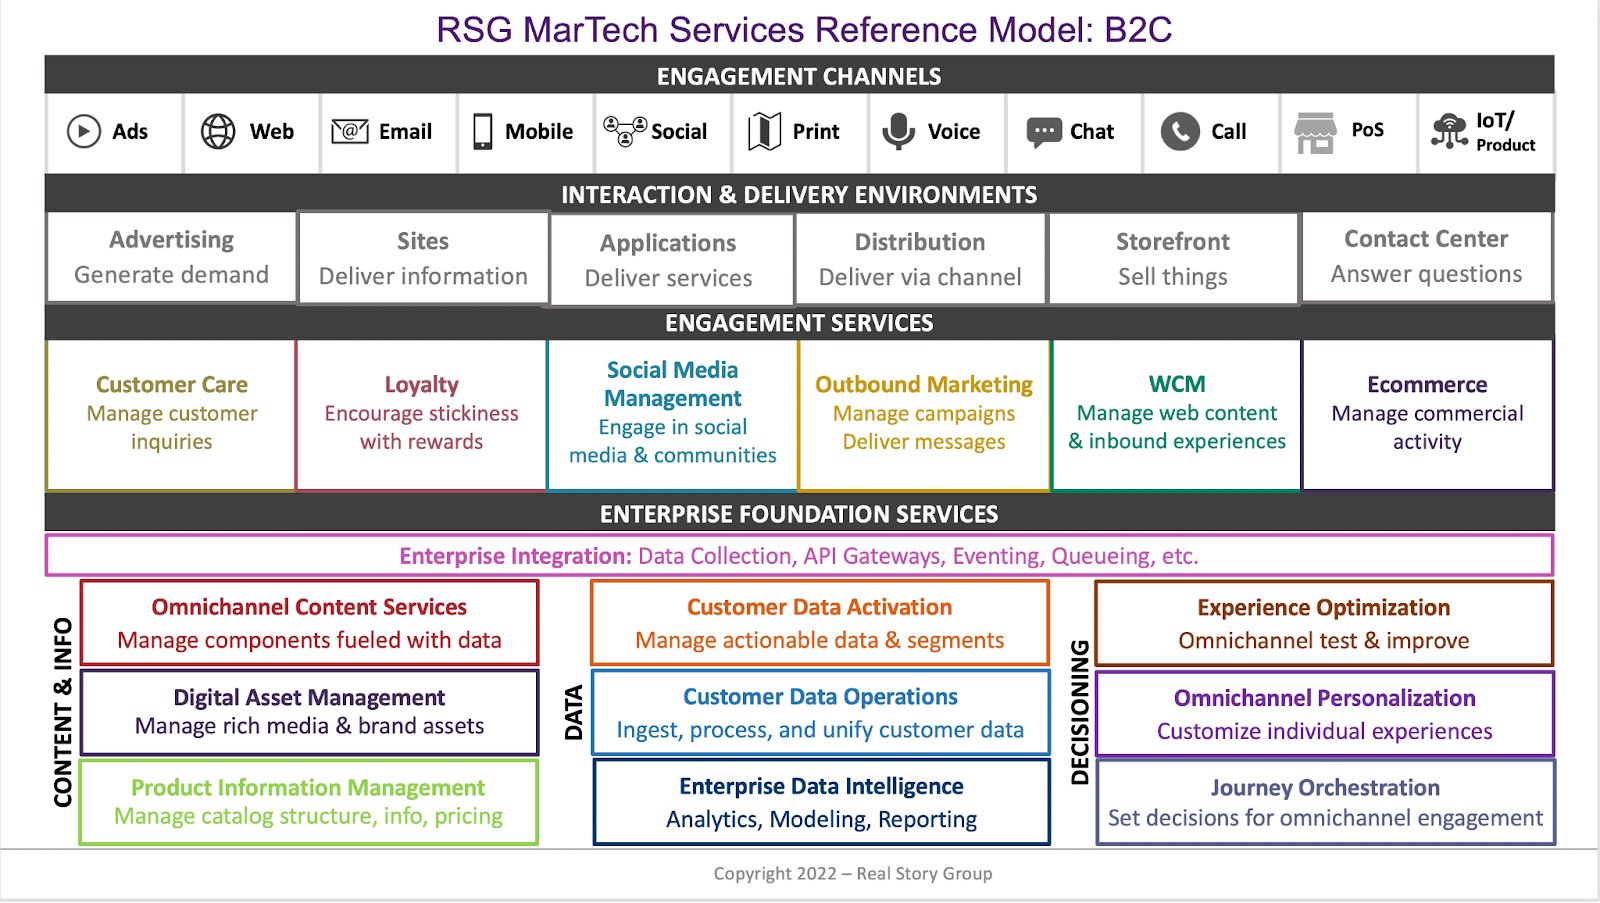 3 prevailing themes pointing to a martech reset